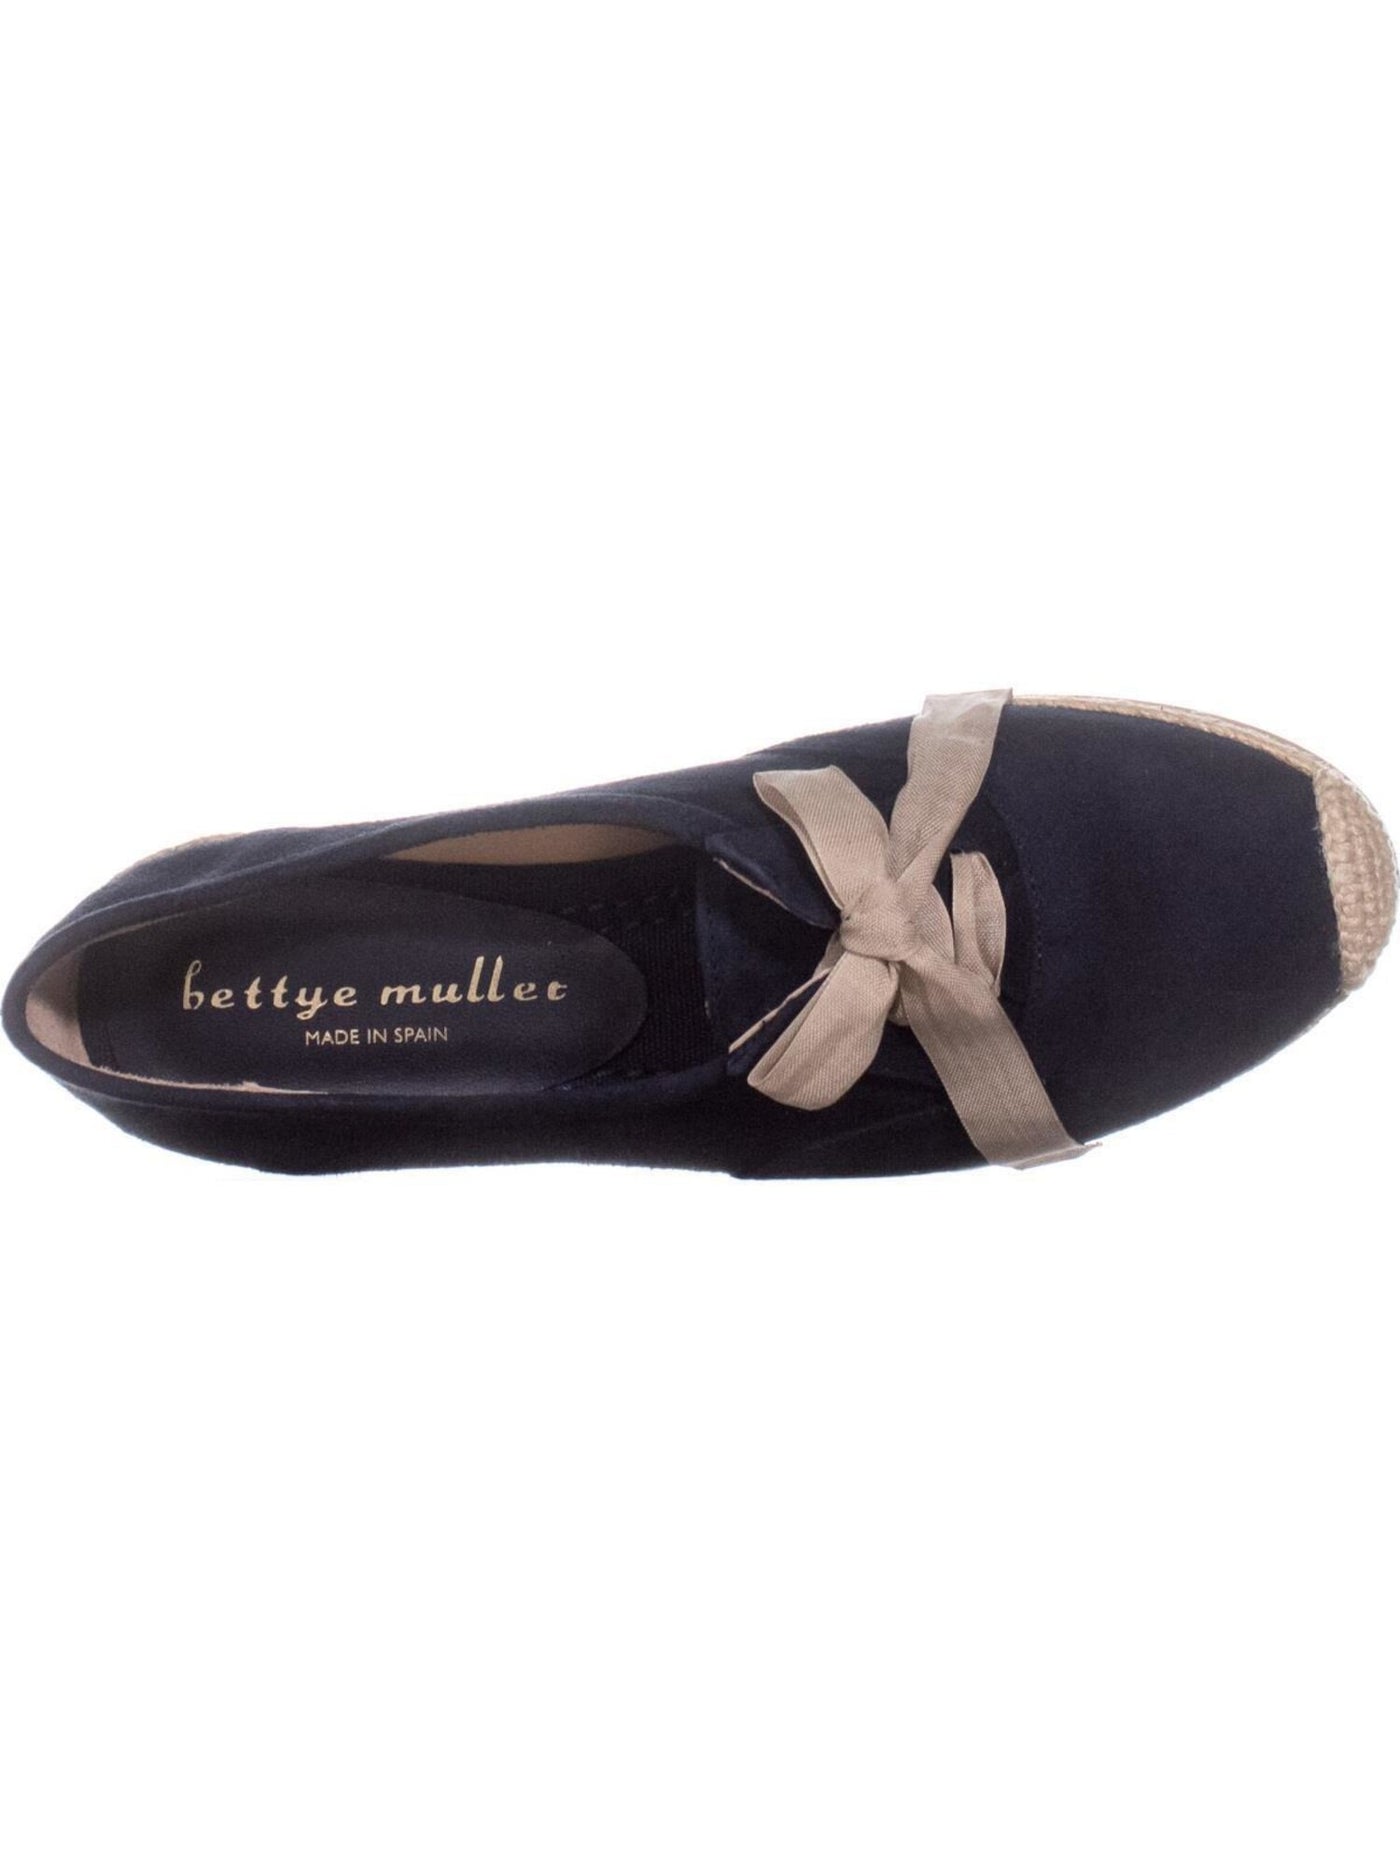 BETTYE MULLER Womens Navy Jute Wrapped Padded Eve Round Toe Lace-Up Leather Espadrille Shoes 38